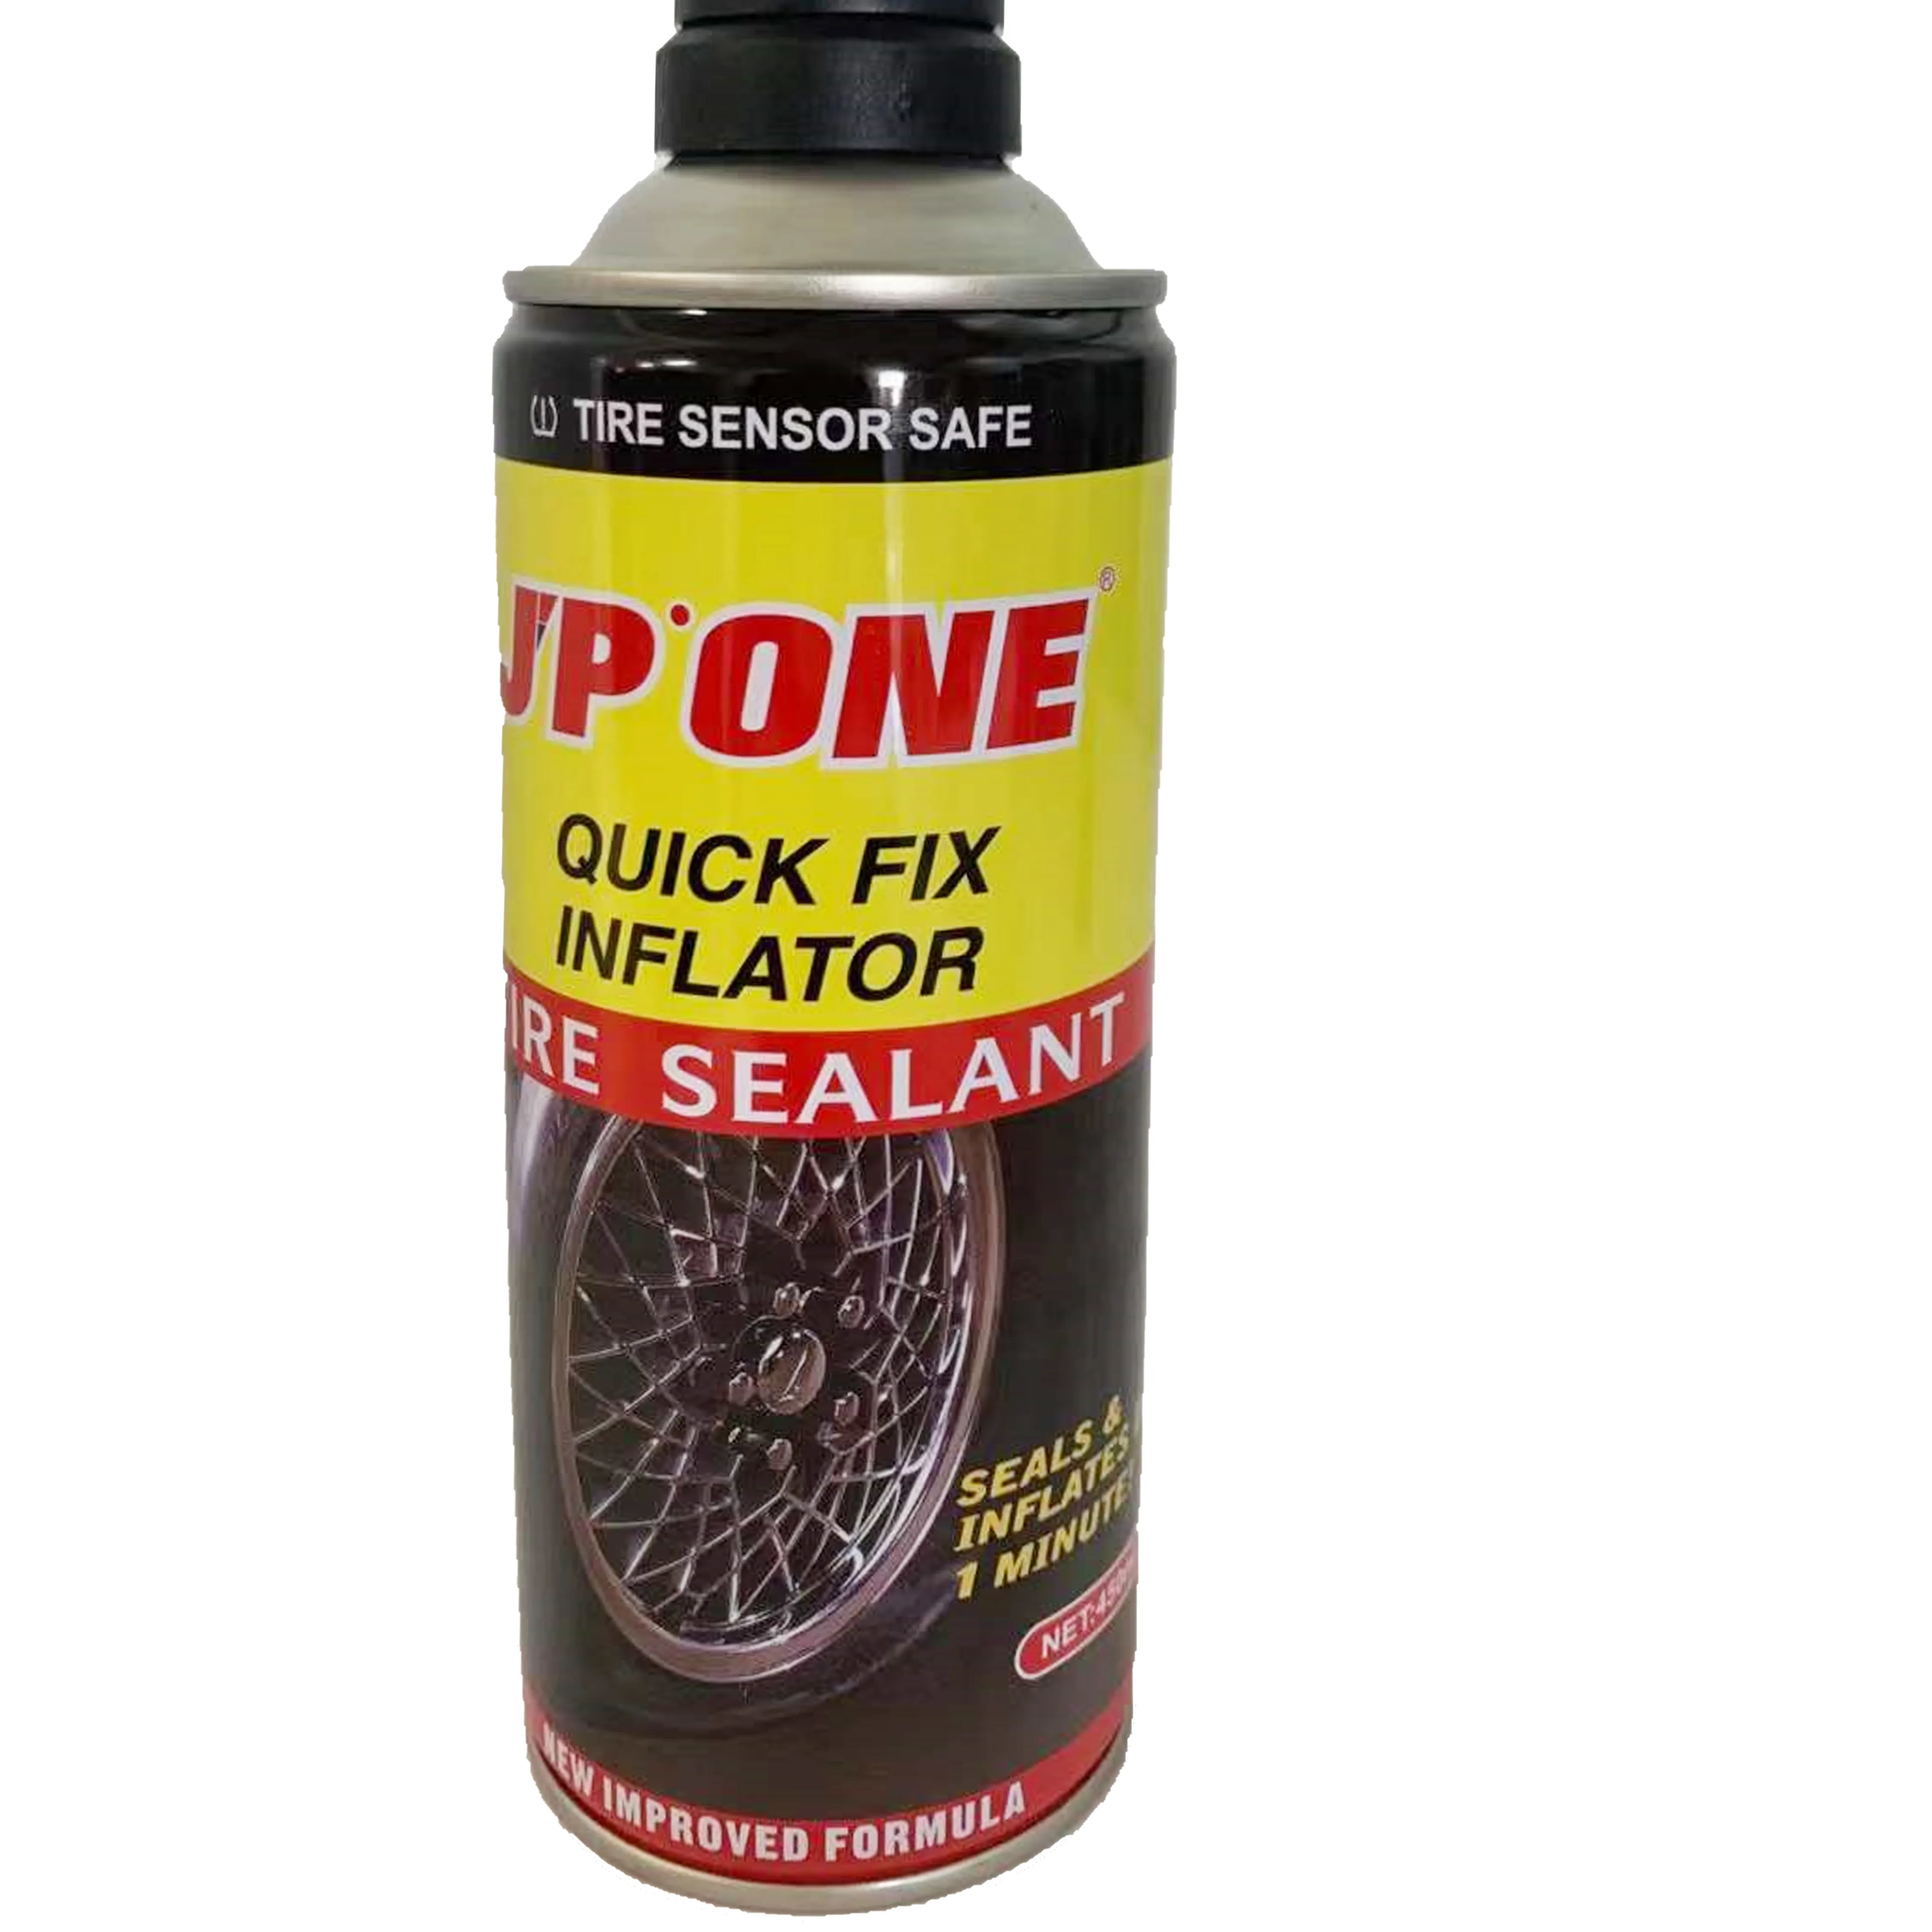 Hot Sell Product Tubeless Tyre Sealant Liquid For Tyre And Motorbike Repair Anti PunctureTyre Sealer And Inflator